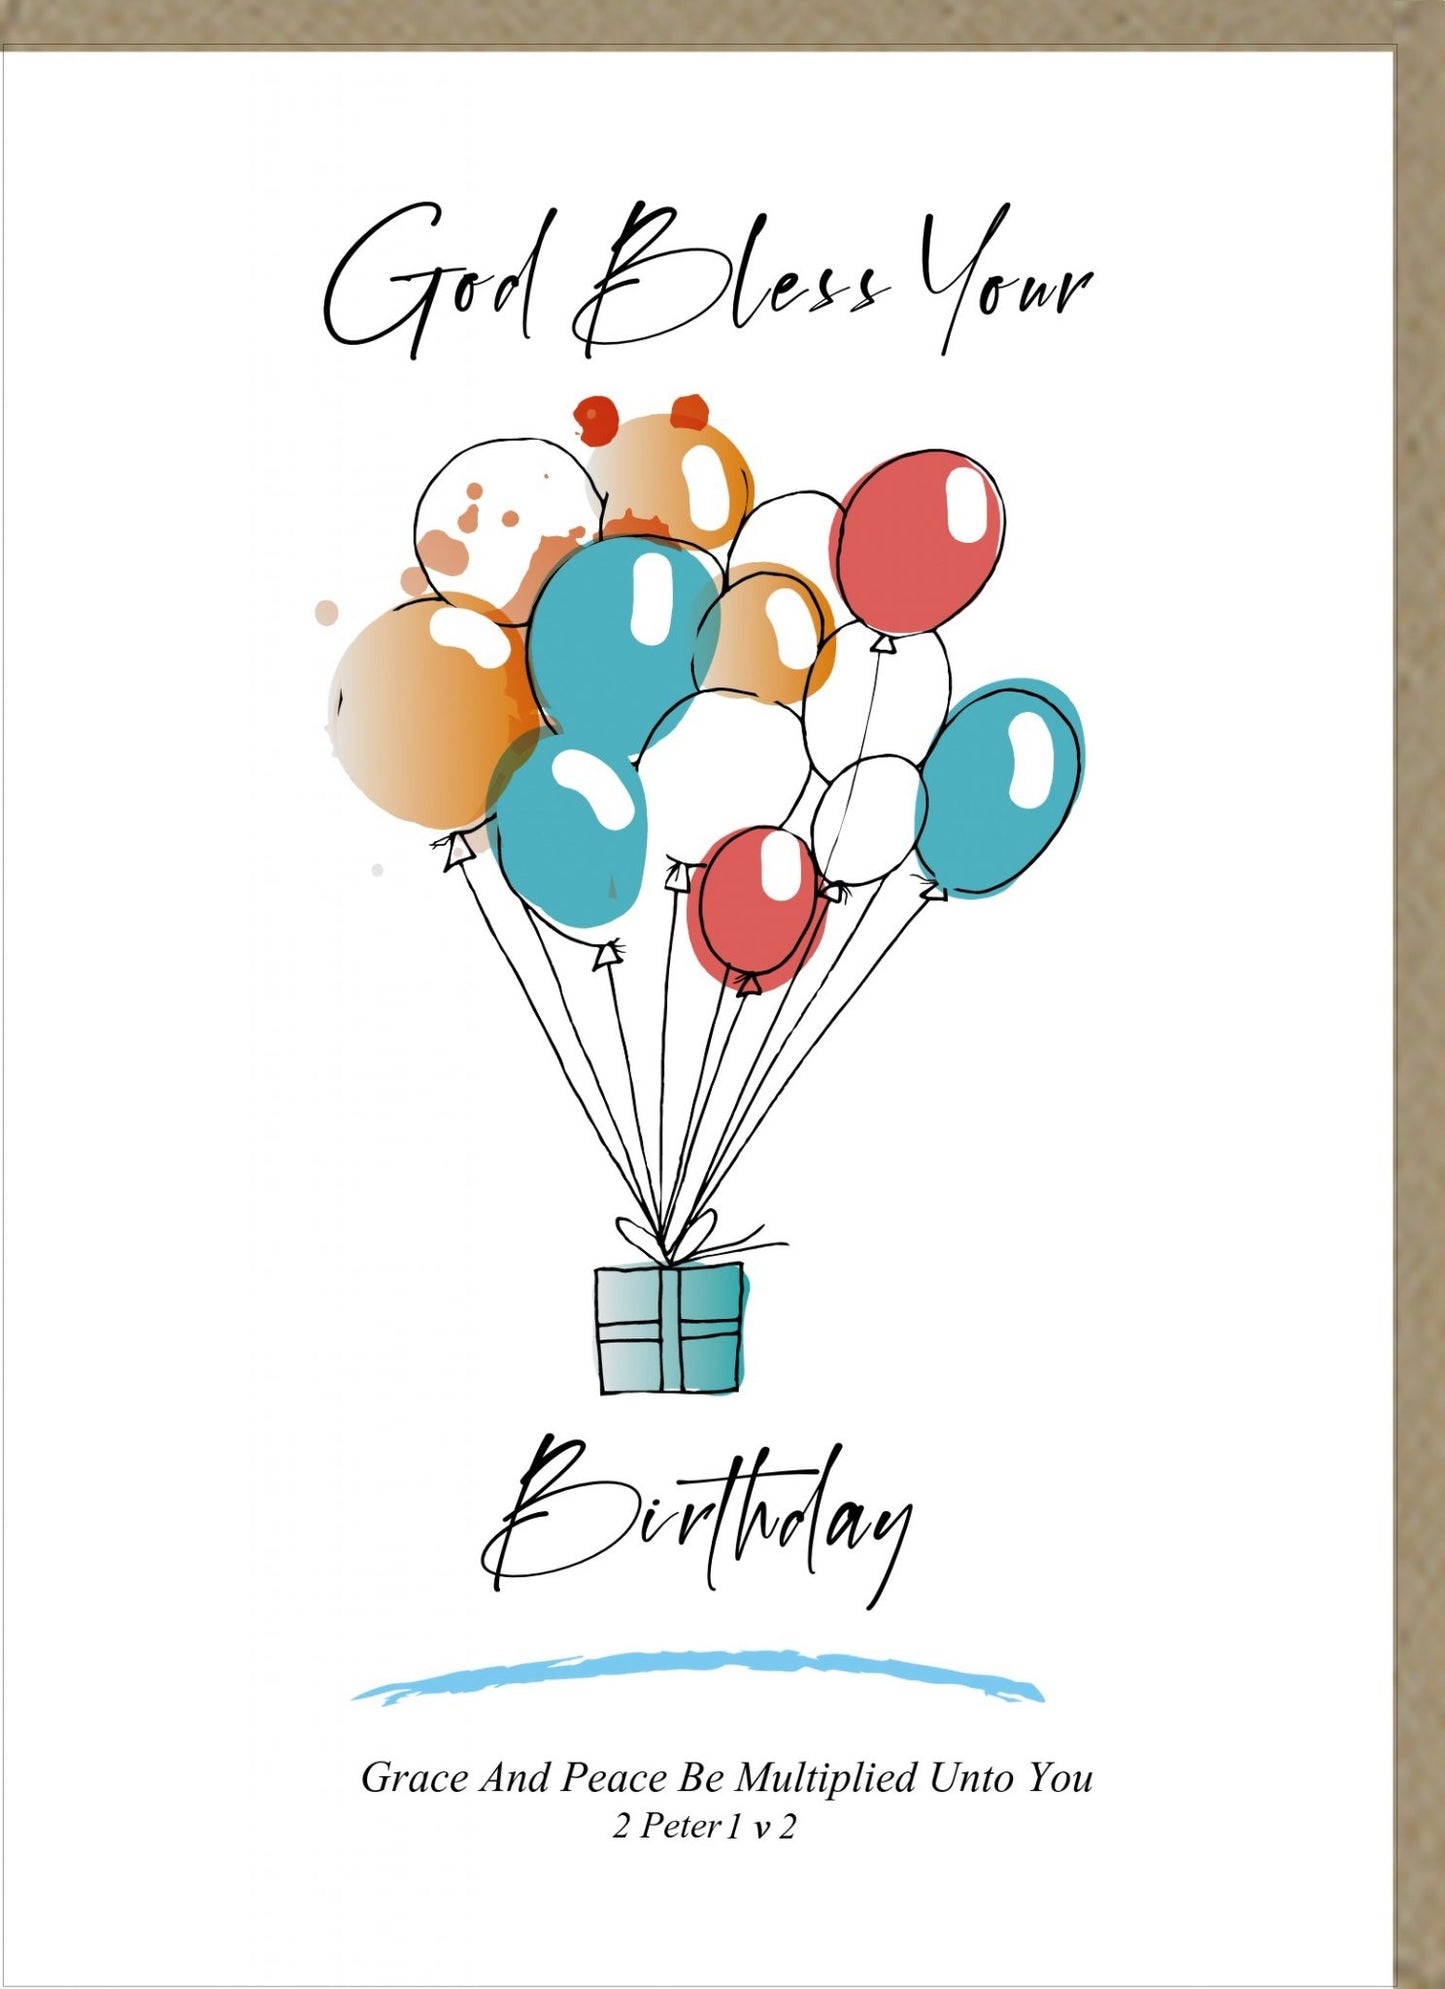 God Bless Your Birthday Greetings Card - The Christian Gift Company